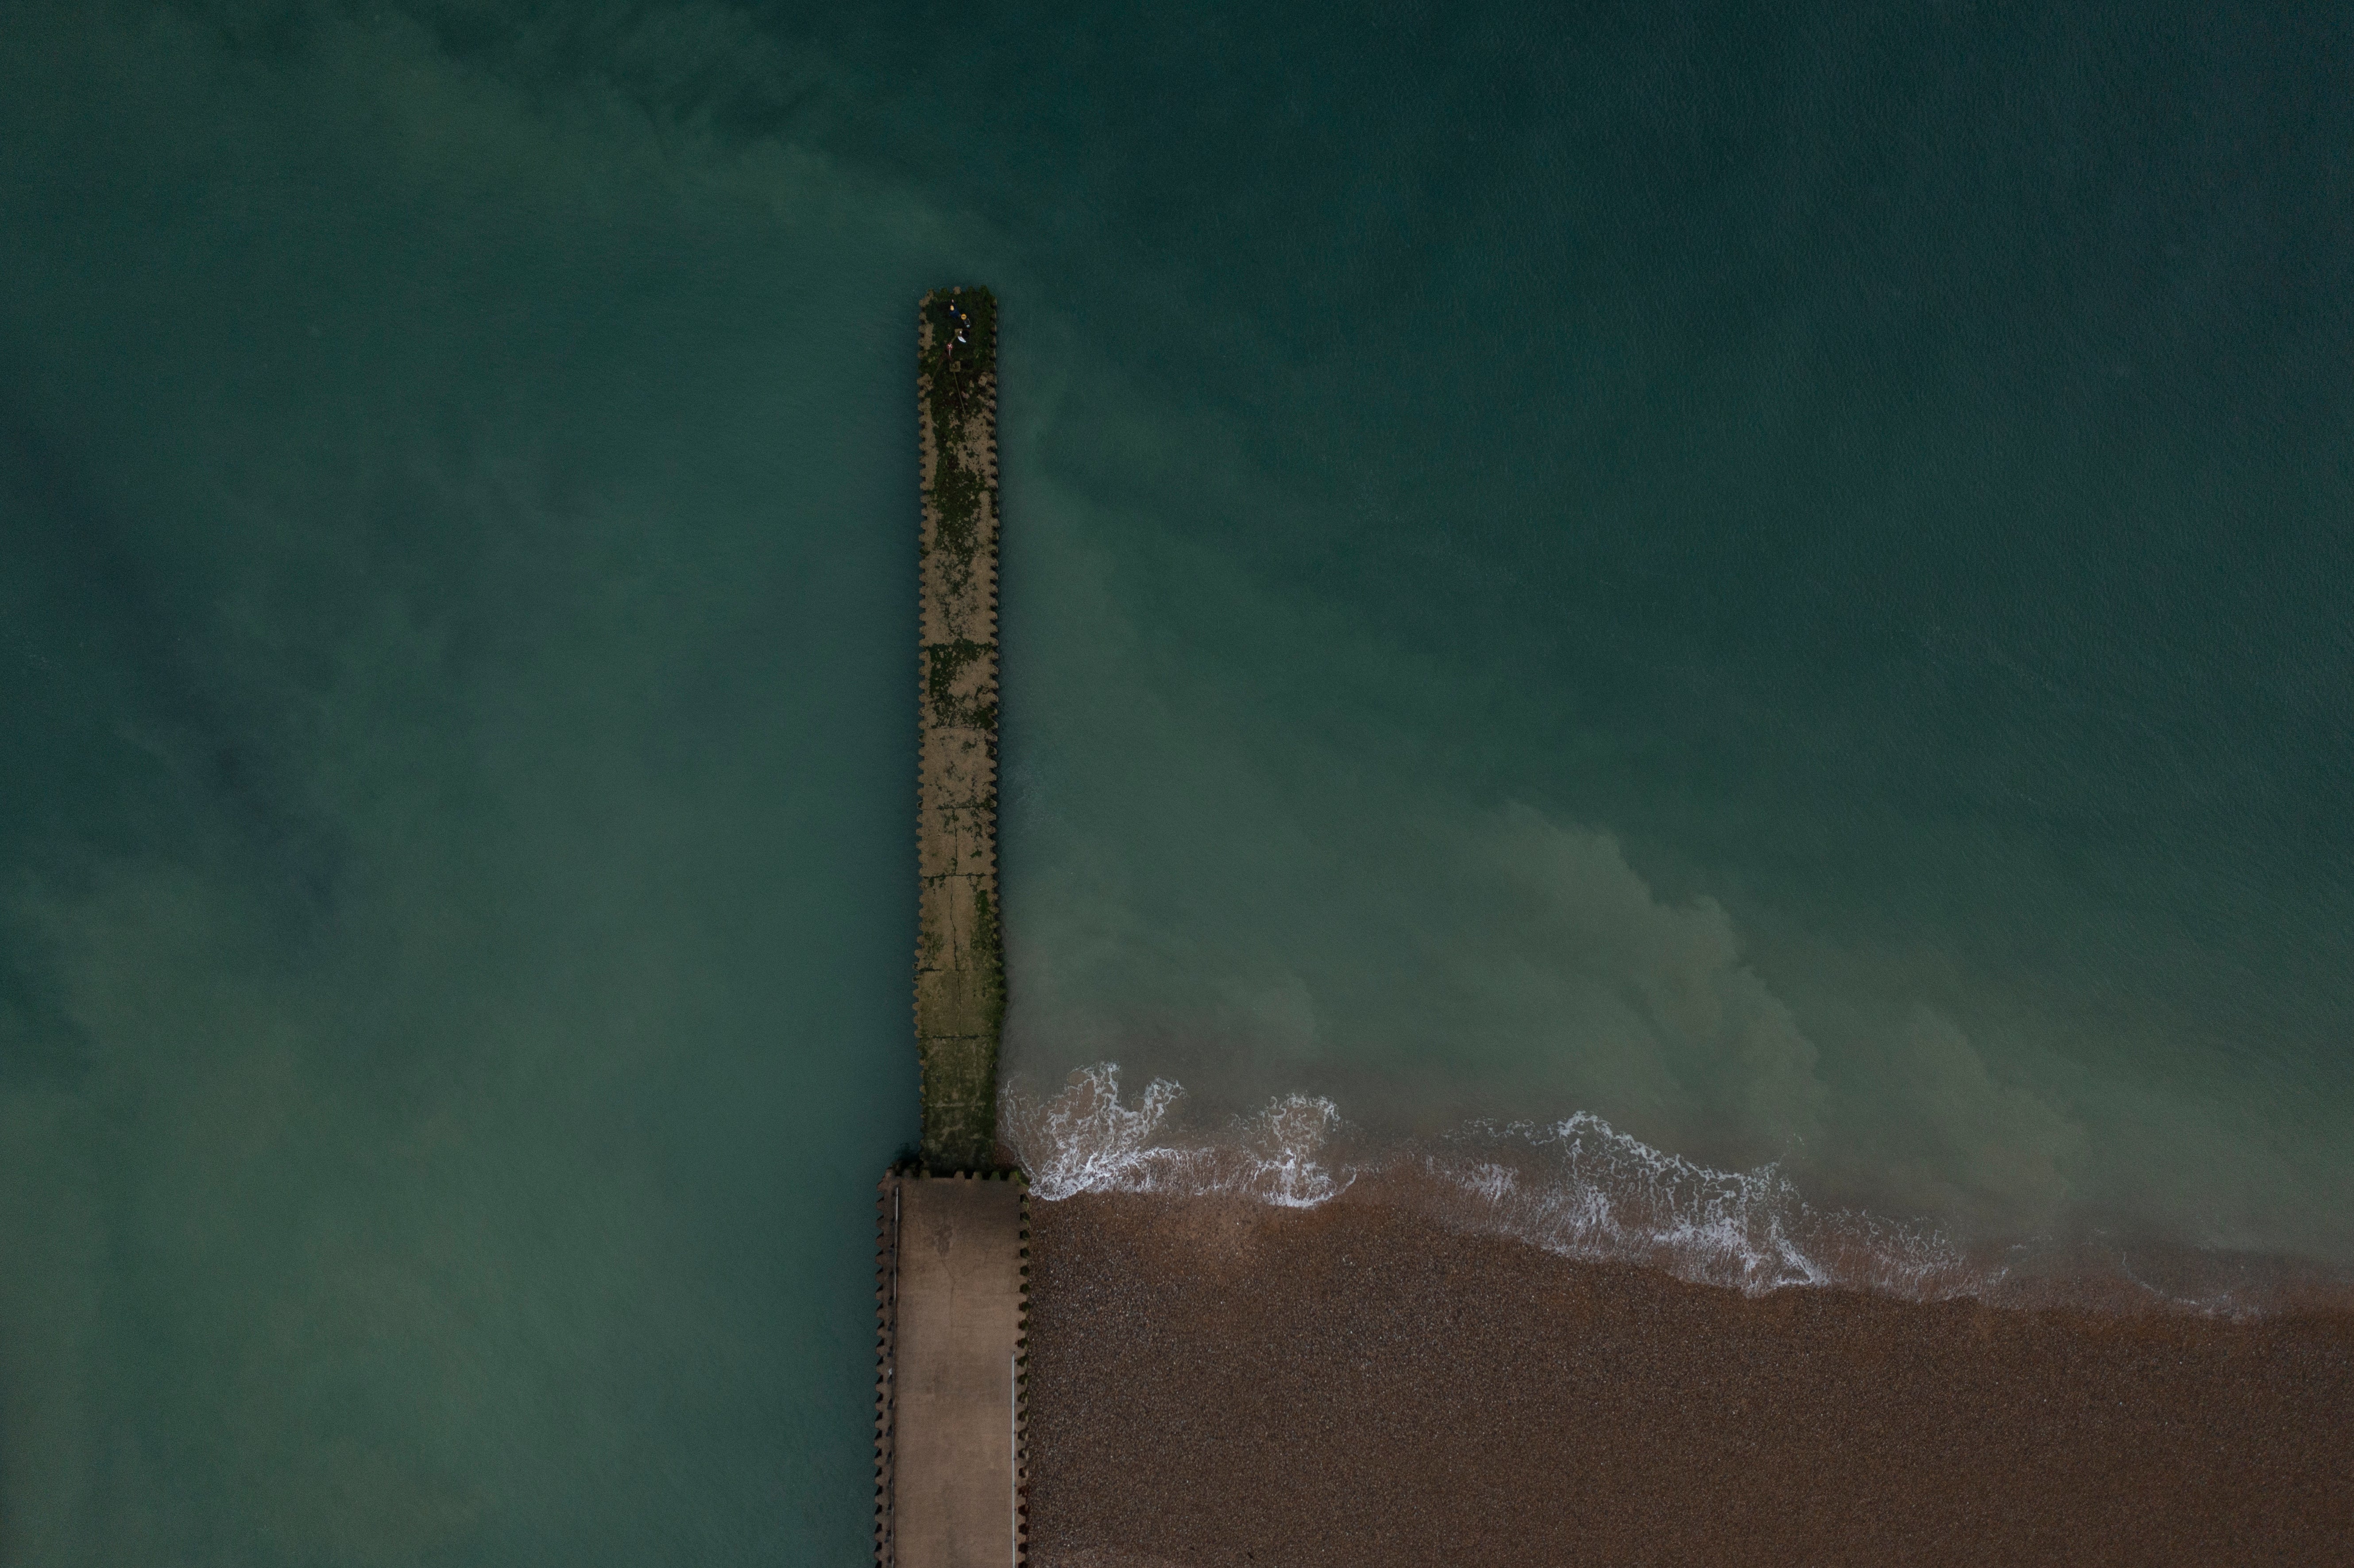 A jetty beneath which raw sewage had reportedly been discharged after heavy rain on 17 August in Seaford, East Sussex